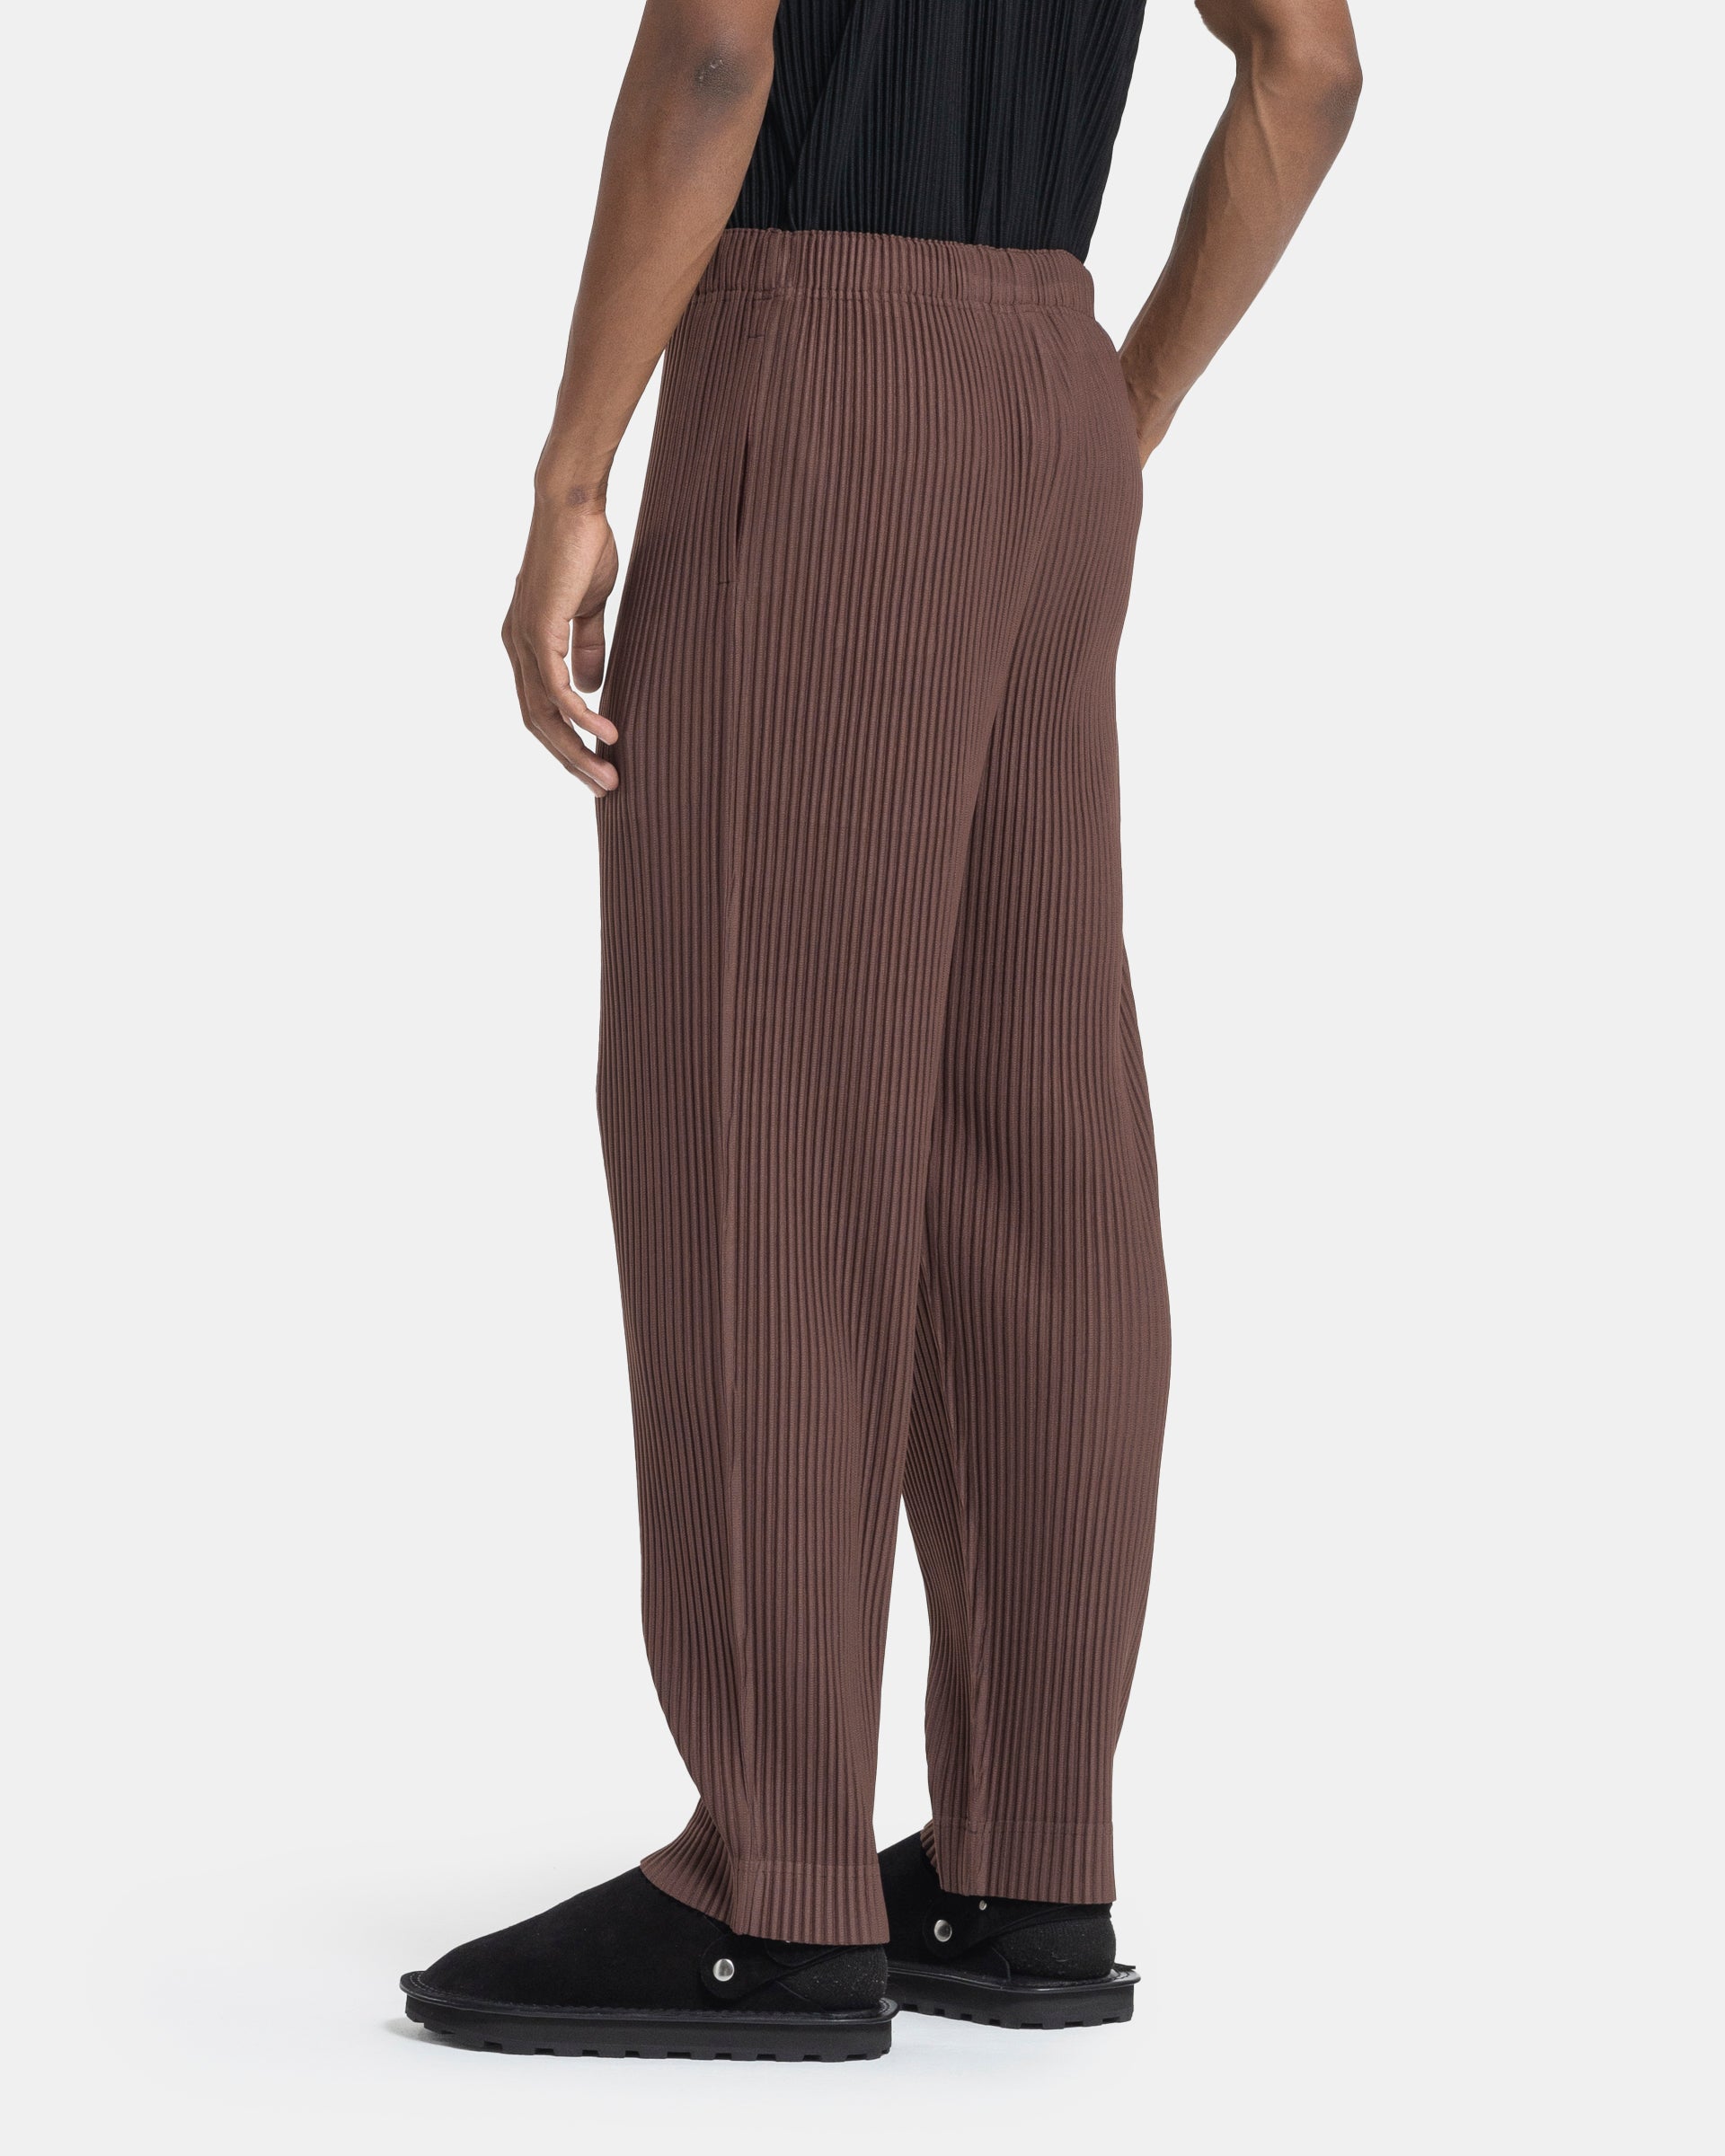 MC September Pants in Cocoa Brown